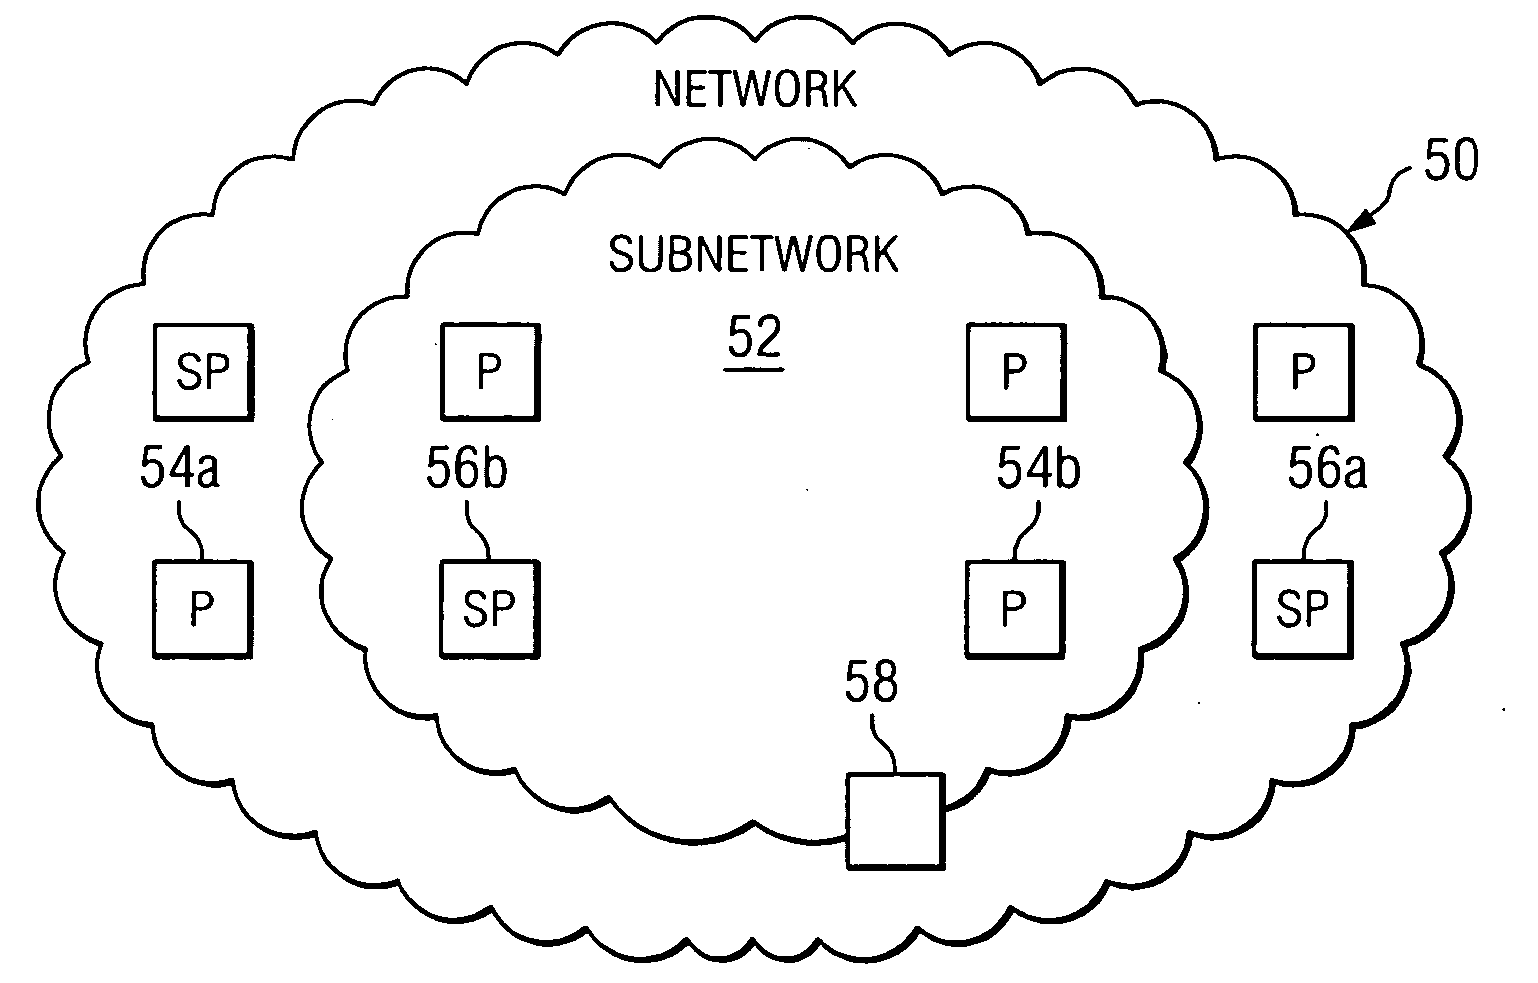 Estimating and managing network traffic